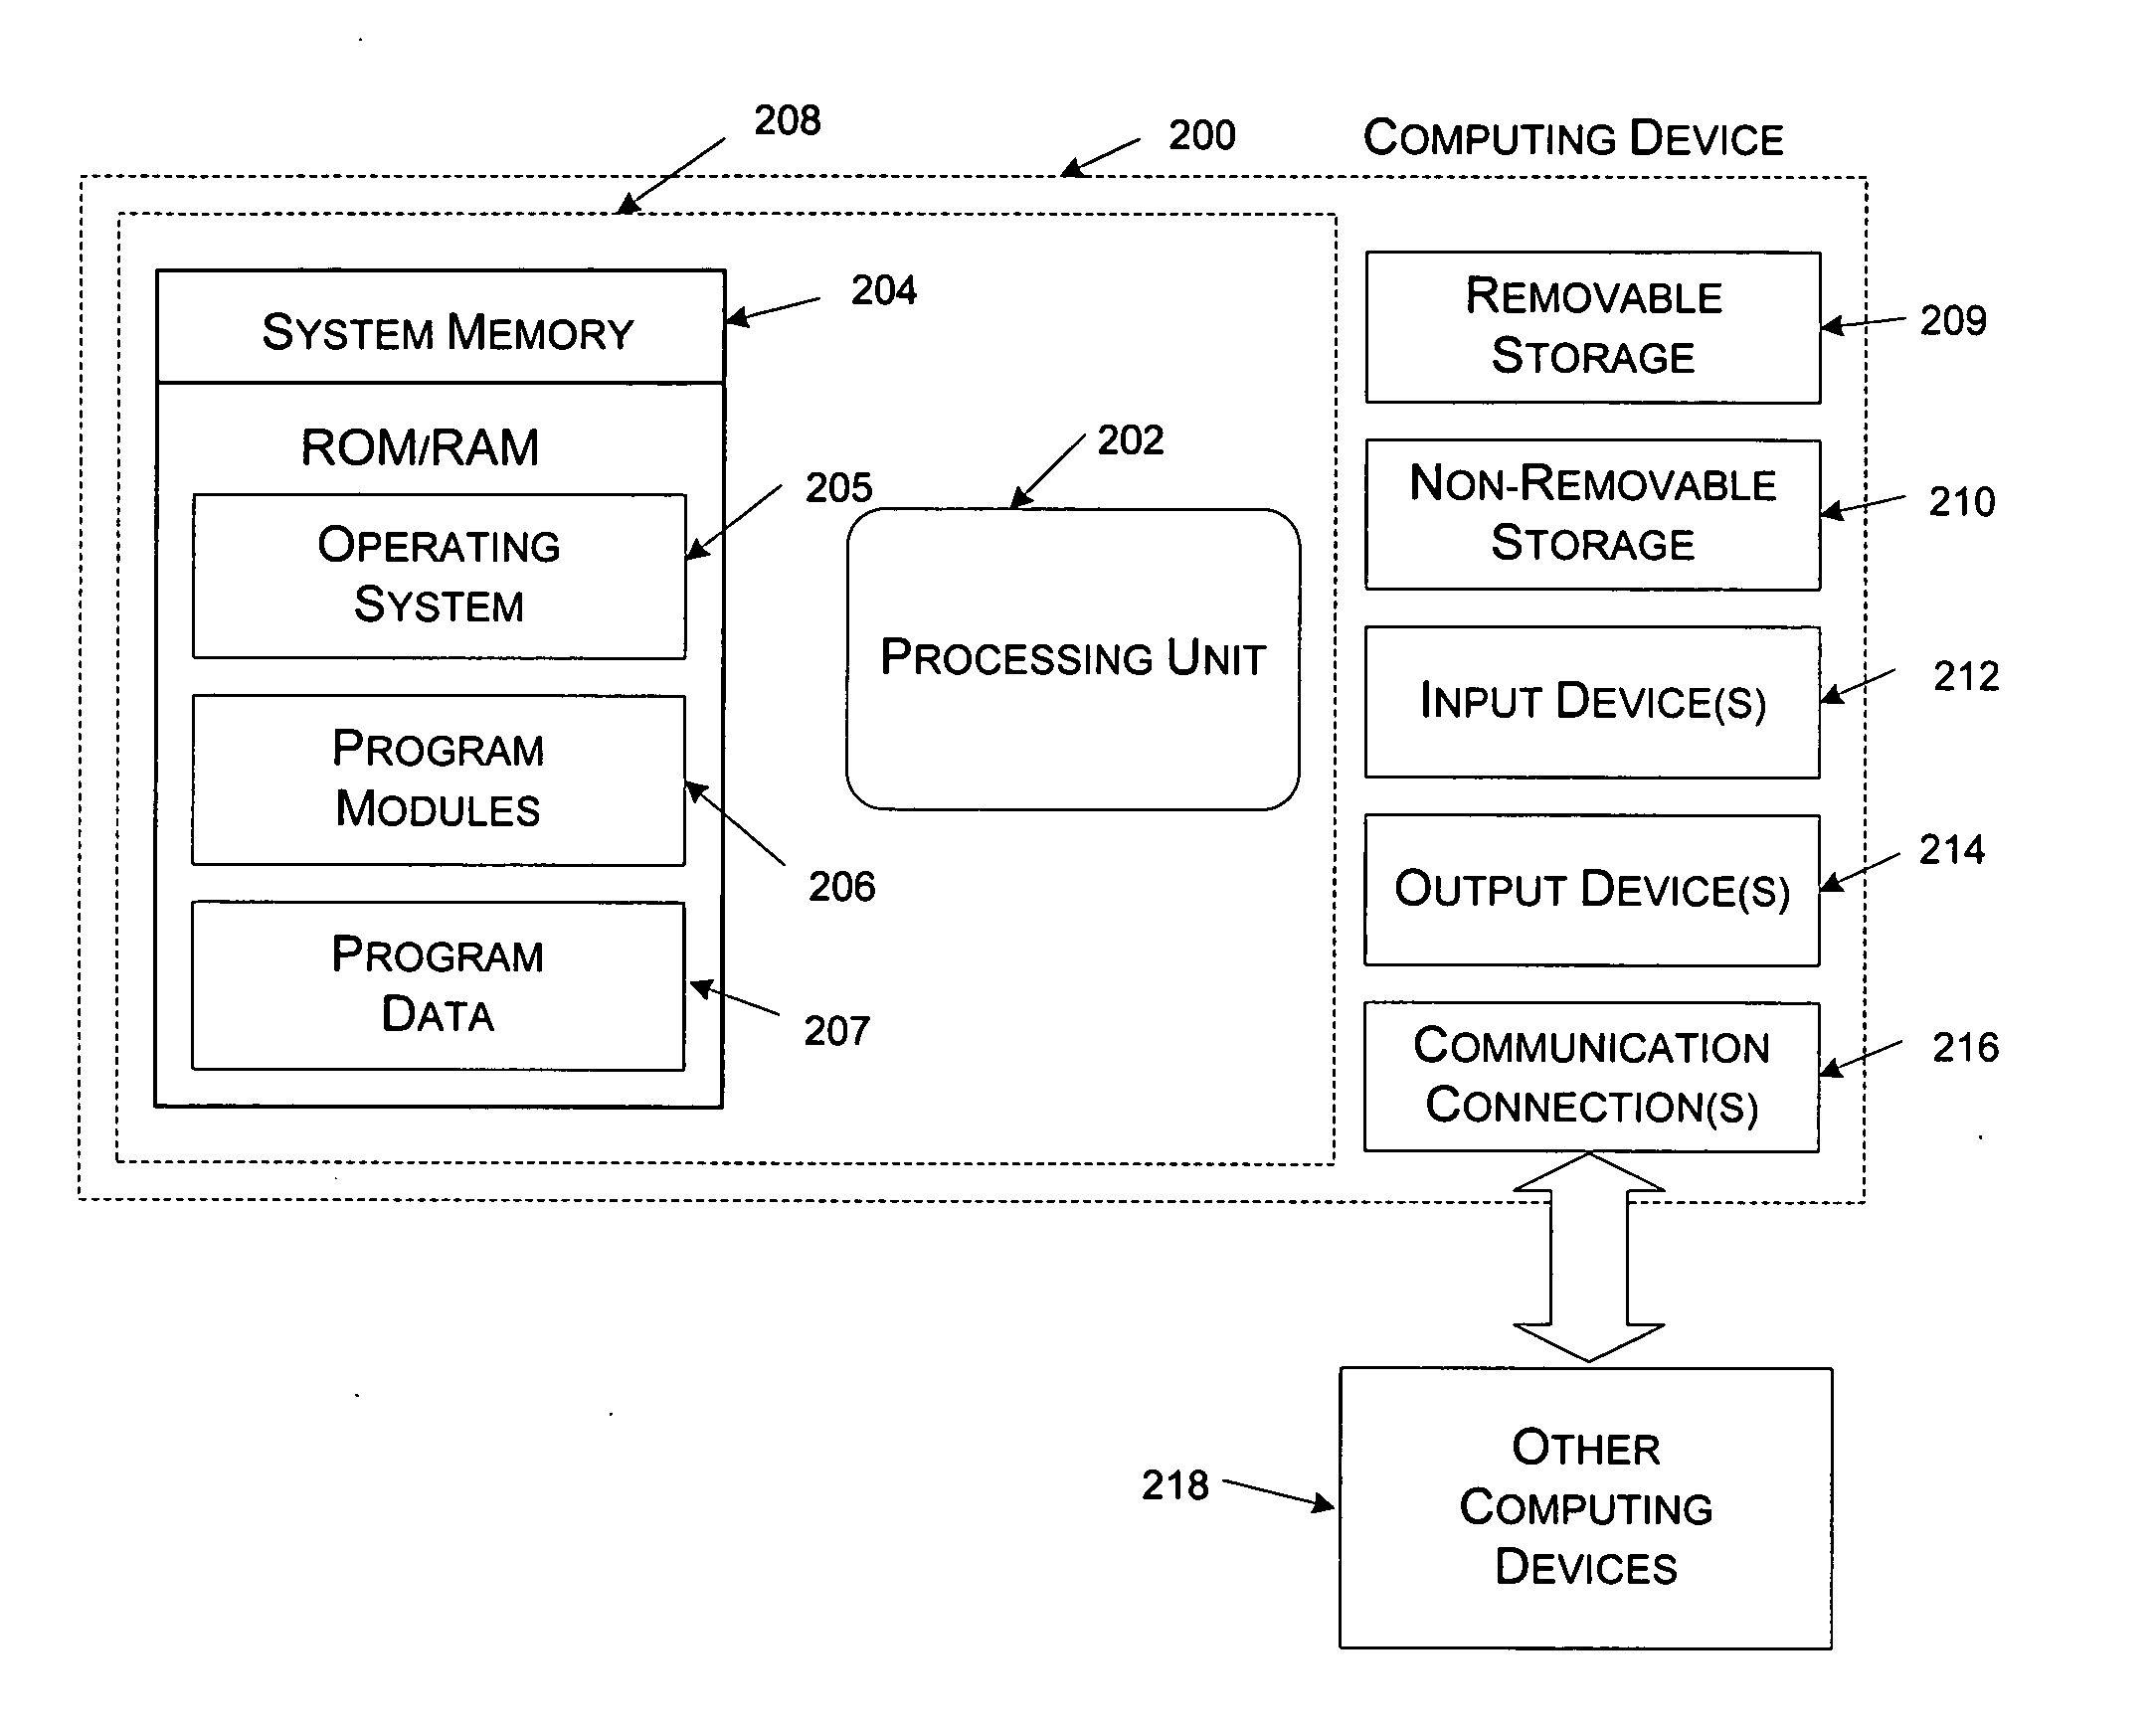 Efficient algorithm and protocol for remote differential compression on a local device